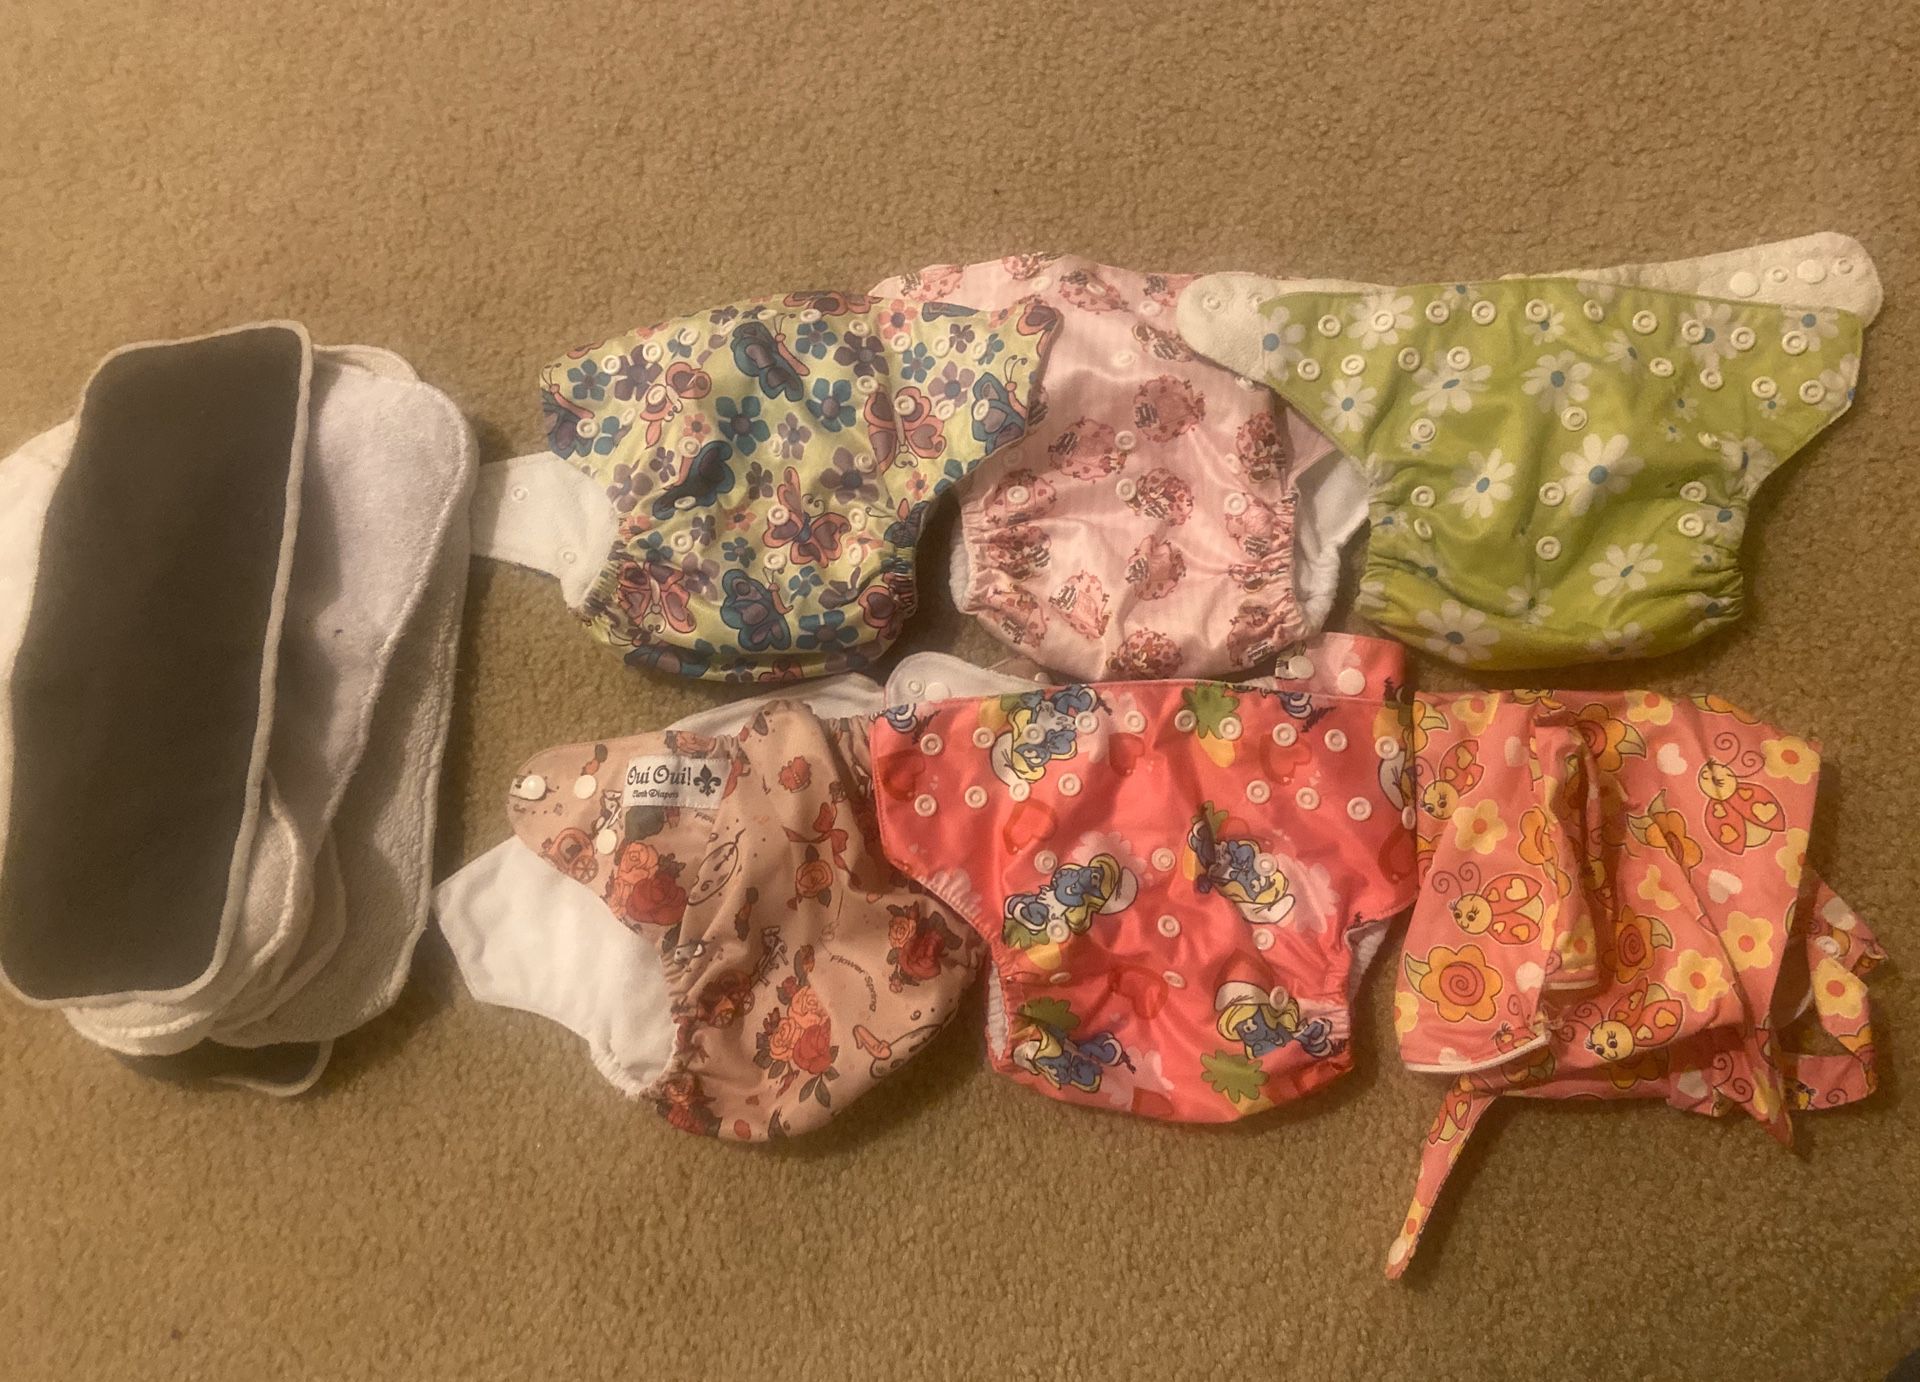 5 Cloth Diapers (Pockets) / 10 inserts / 1 wetbag included